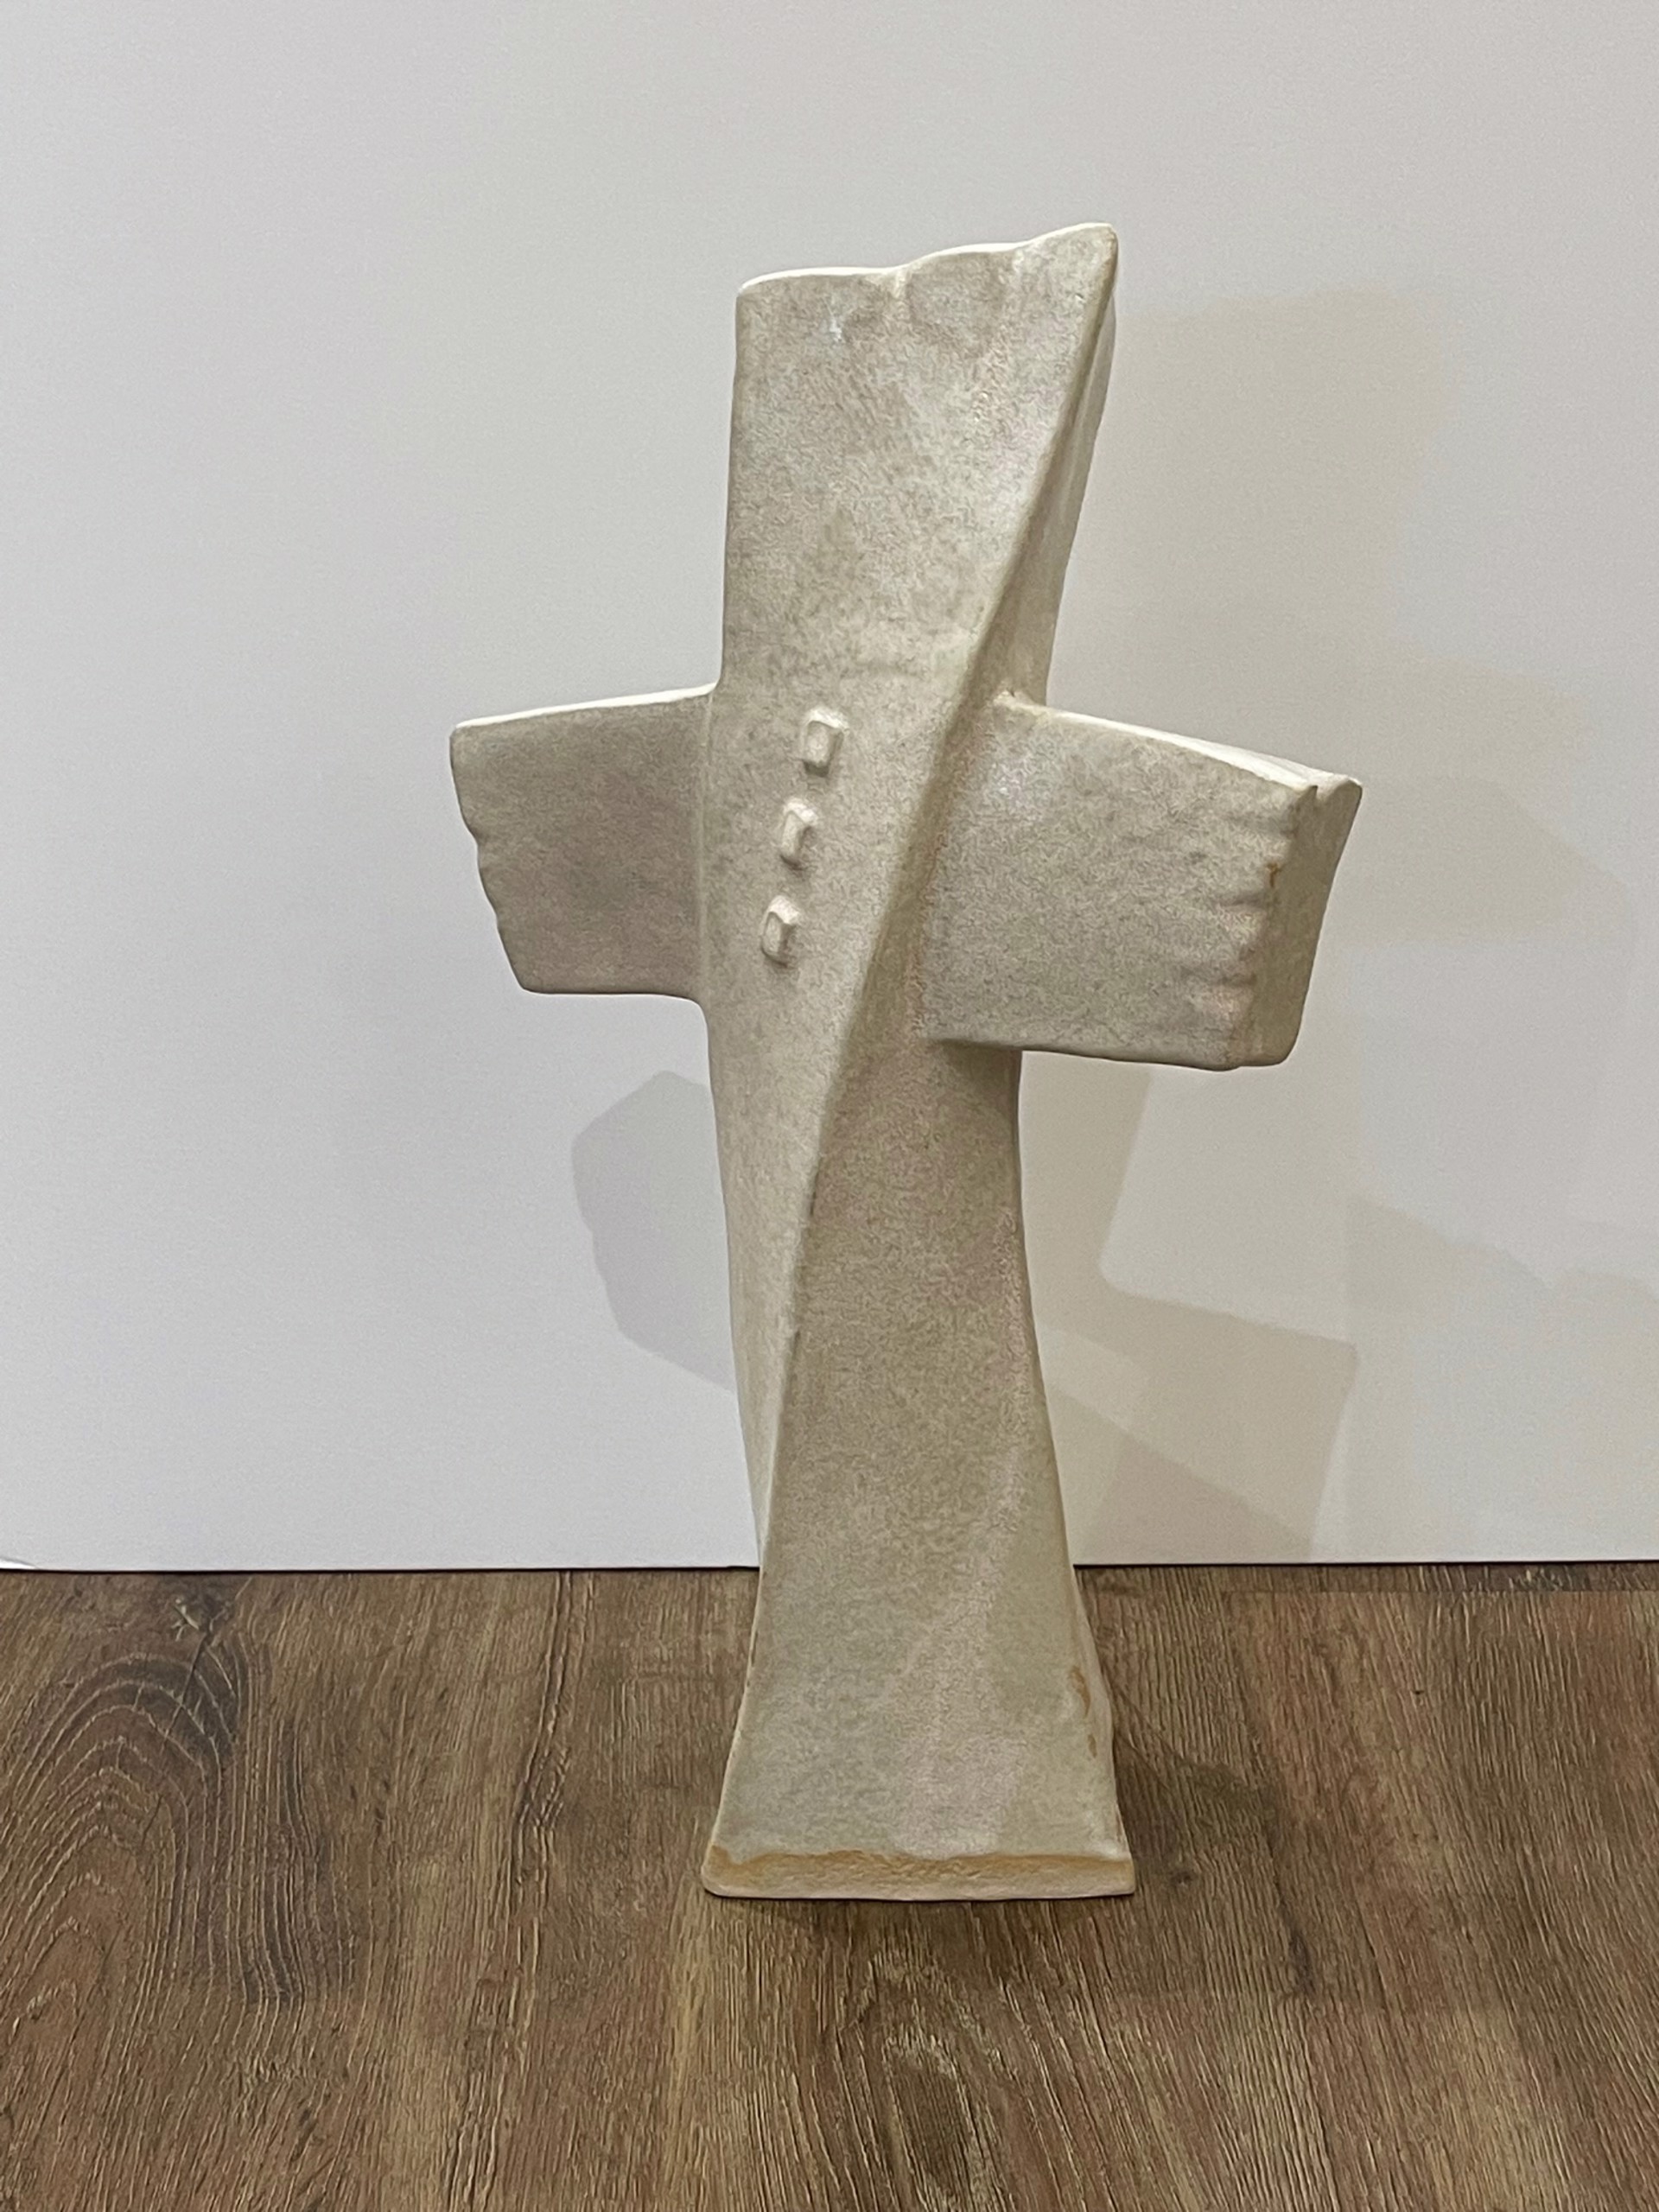 Twisted Cross Ivory by Satterfield Pottery